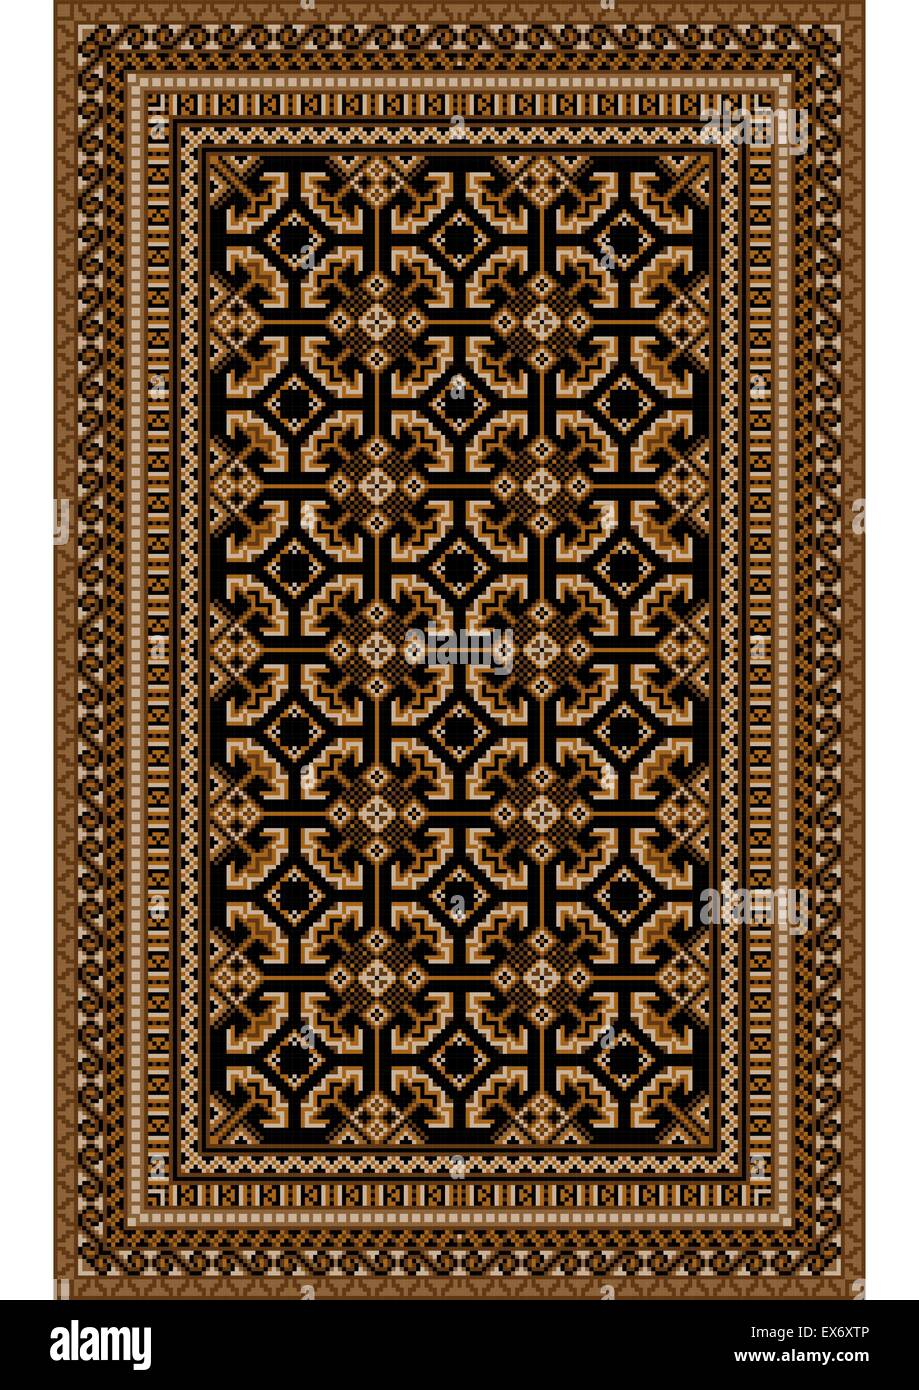 Rug with patterned beige and brown shades on a black background Stock Vector